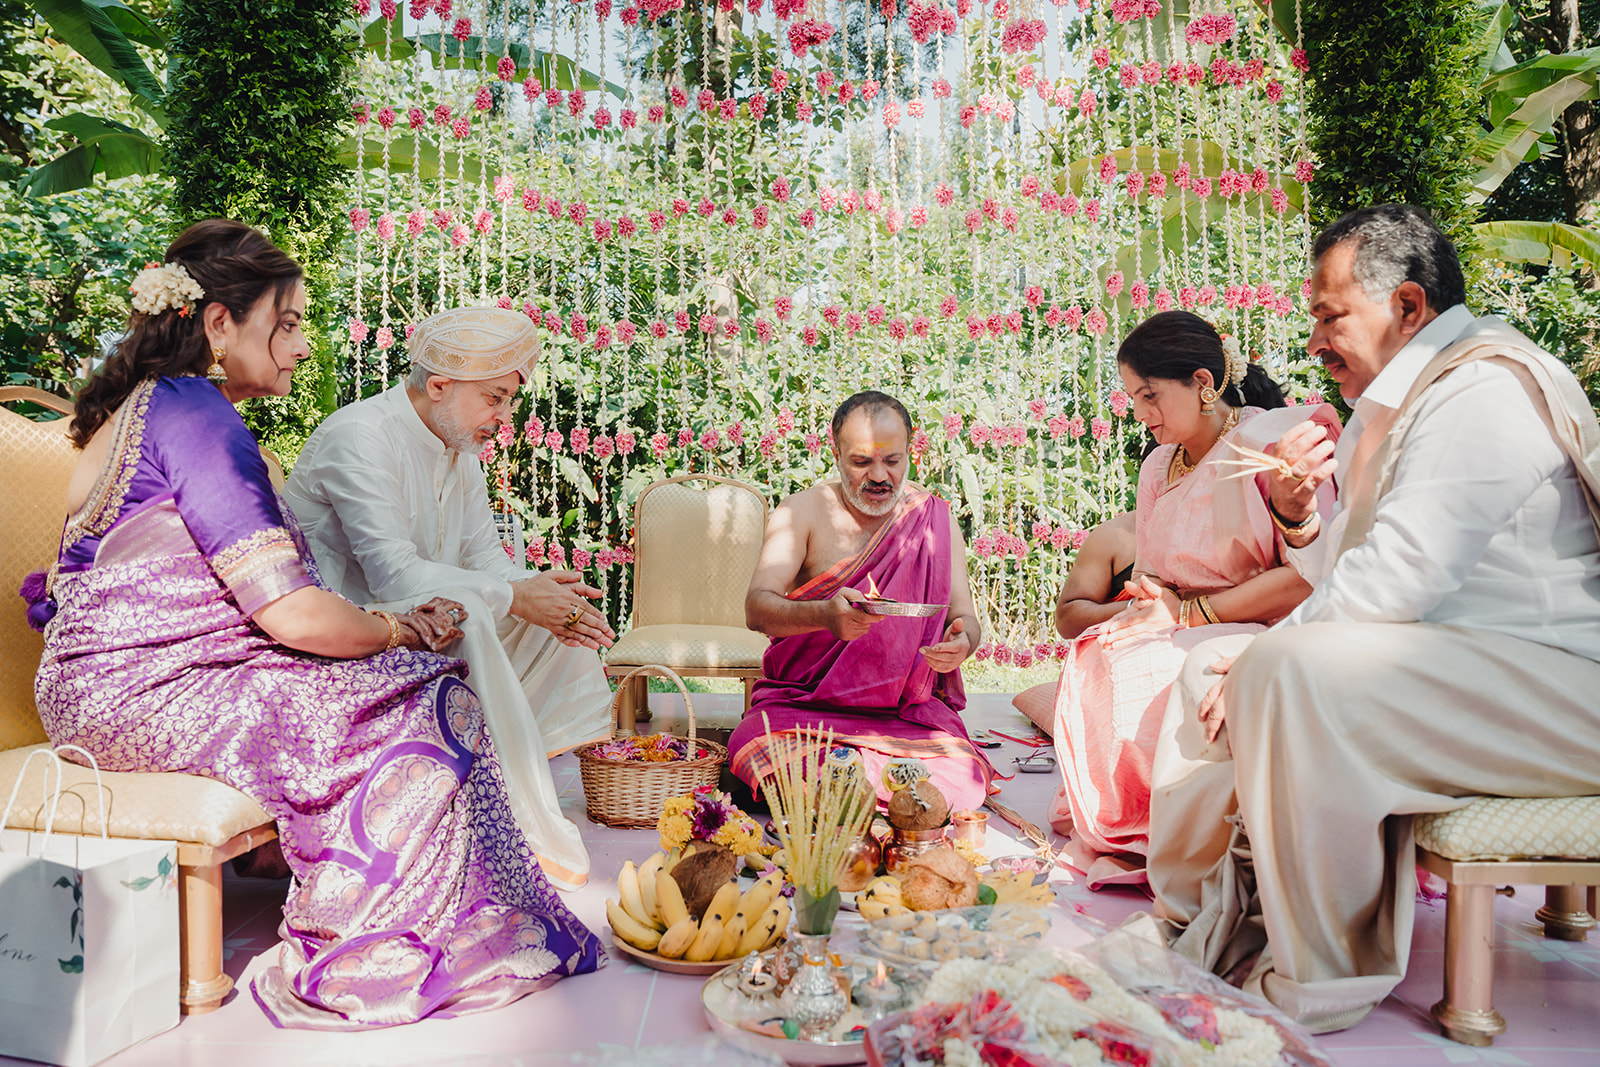 Ceremonial bliss: A picture-perfect scene from the joyous wedding ceremony